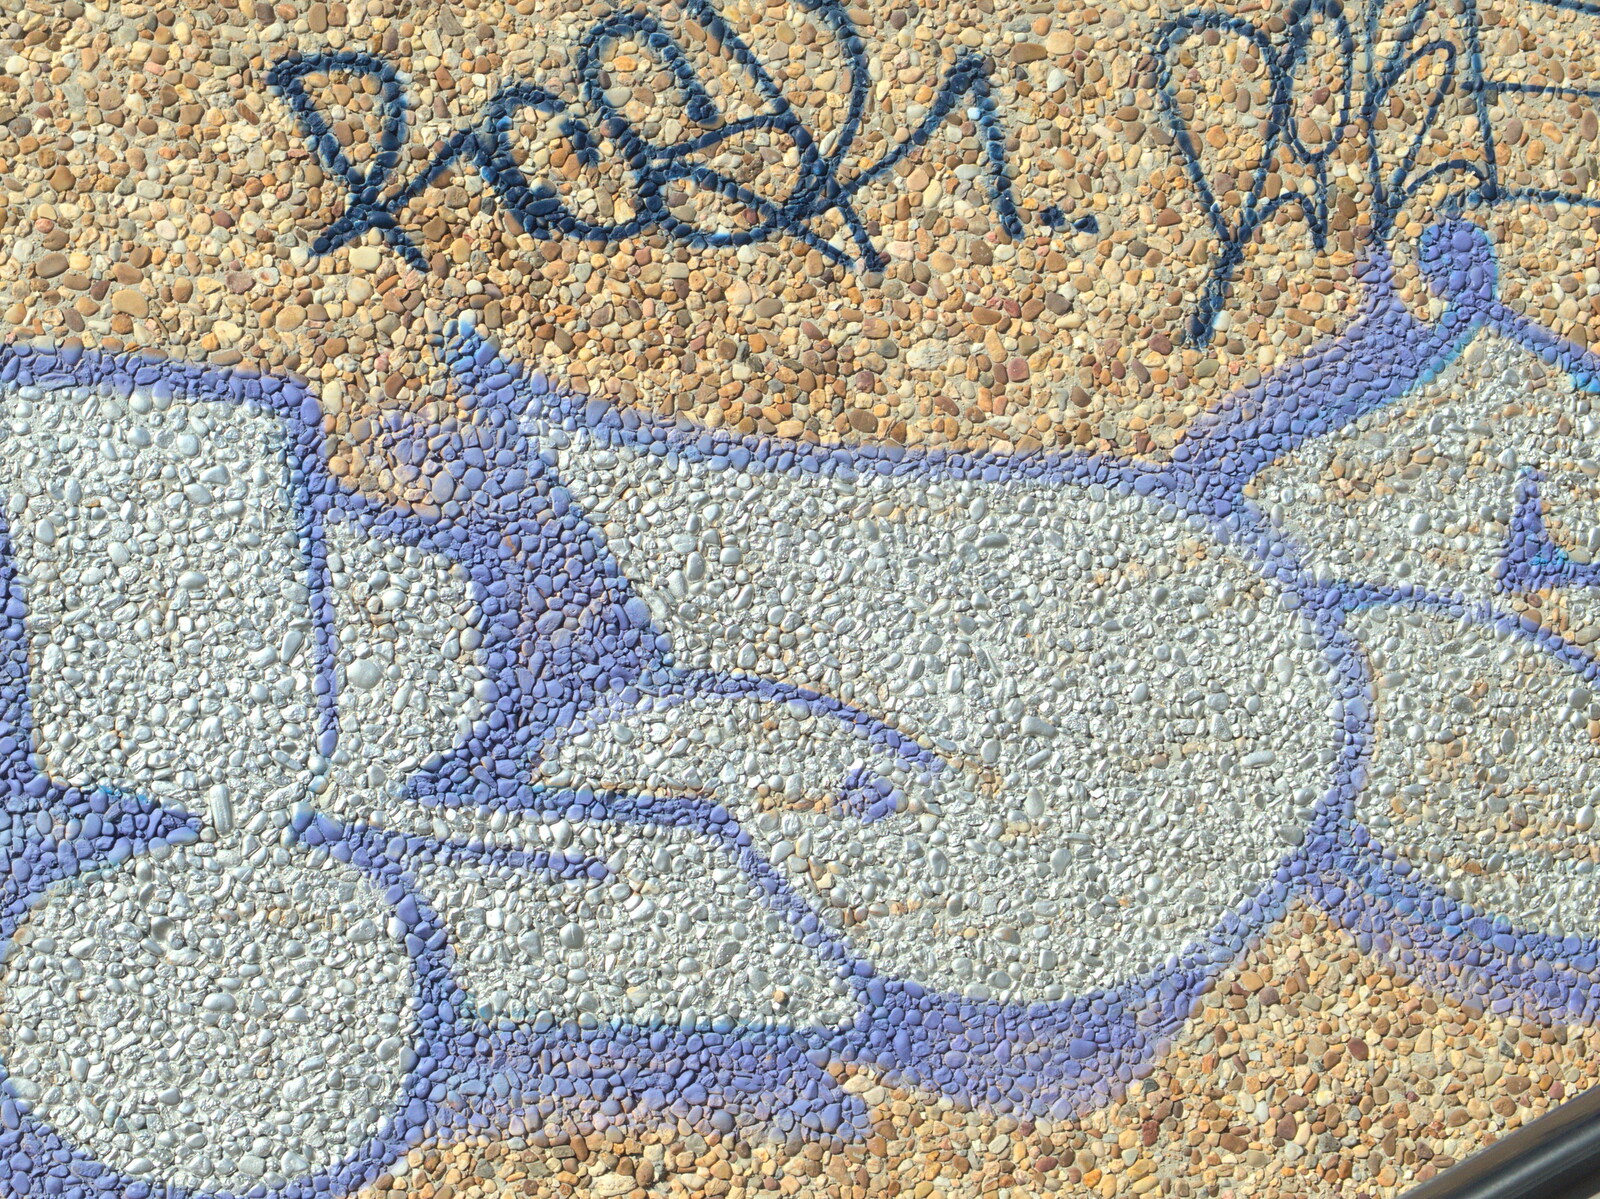 Pebble-dash graffiti from Last Days and the Journey Home, Albufeira, Portugal - 9th April 2016